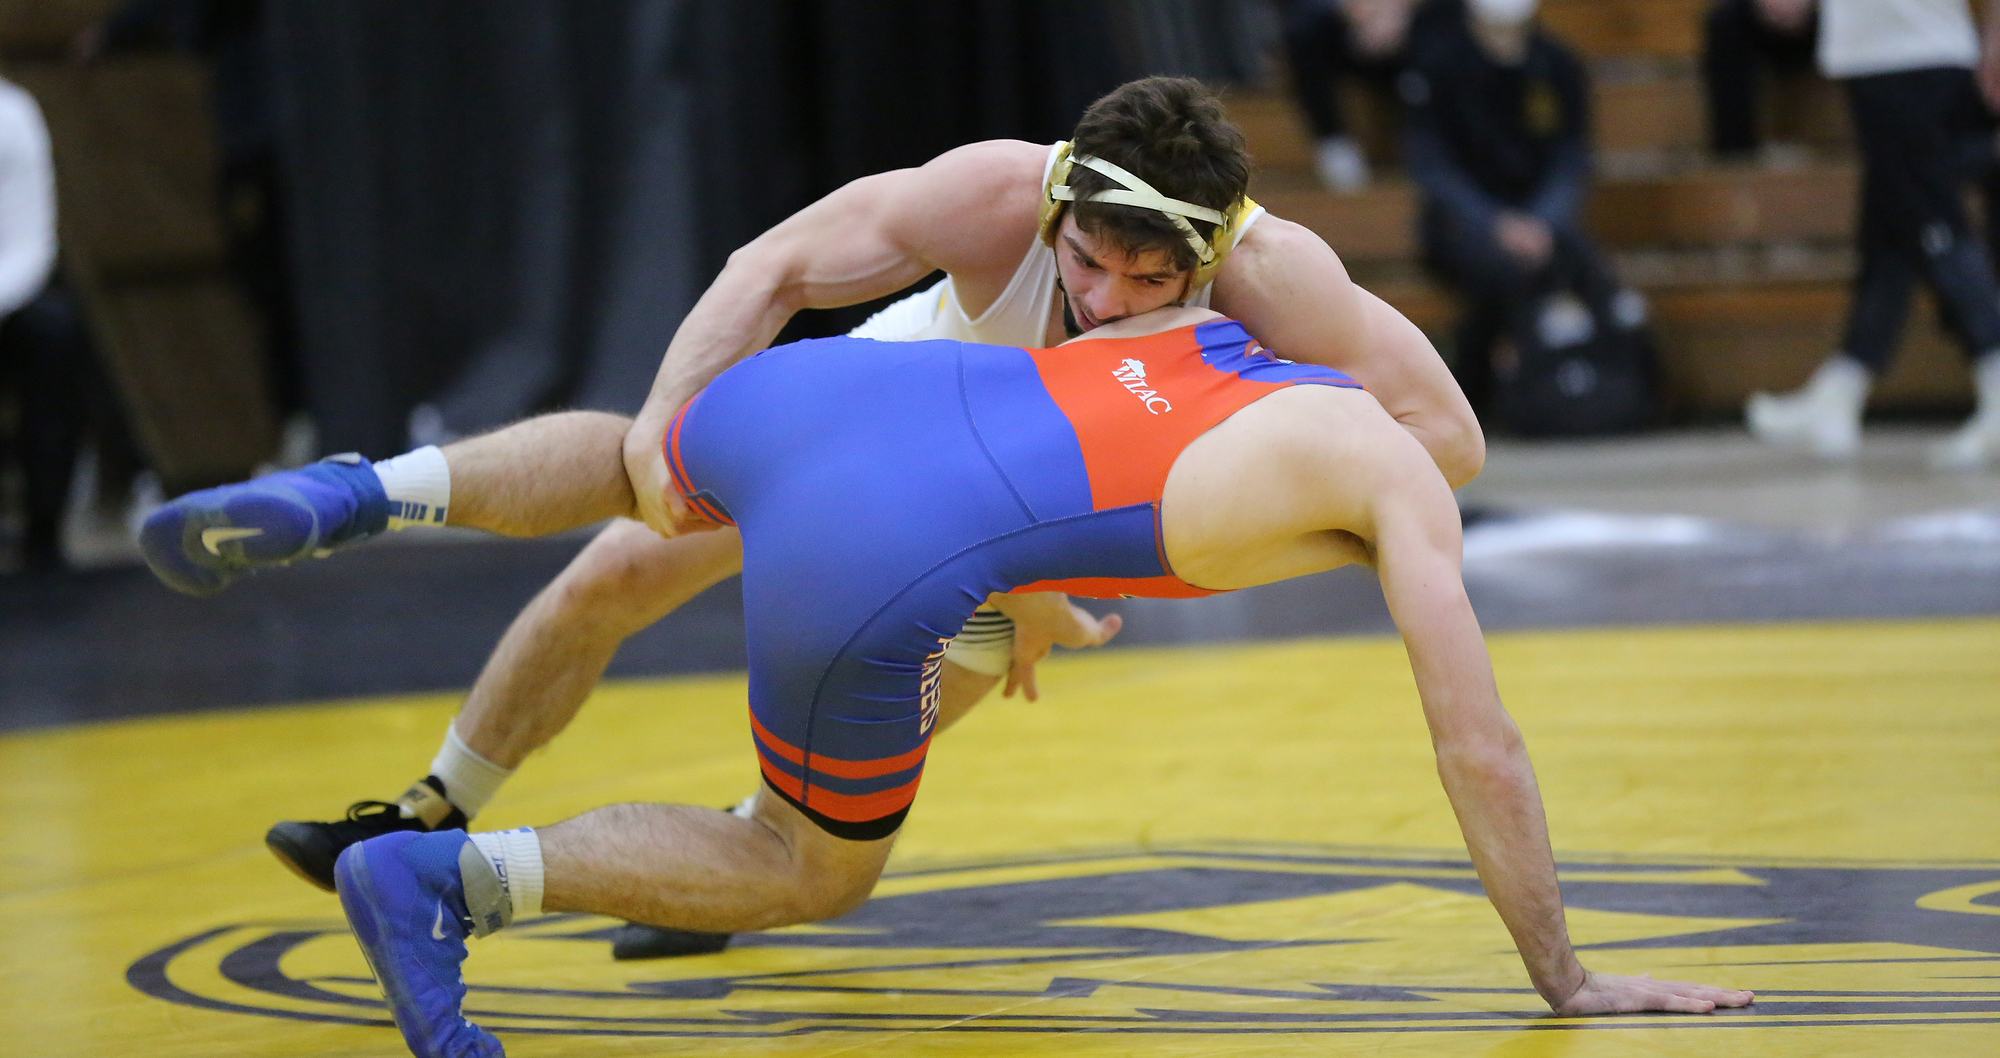 Wesam Alabed gave UW-Oshkosh an 11-6 lead with his 17-0 (technical fall, 4:32) victory over UW-Platteville's Garrett Ruckdashel.